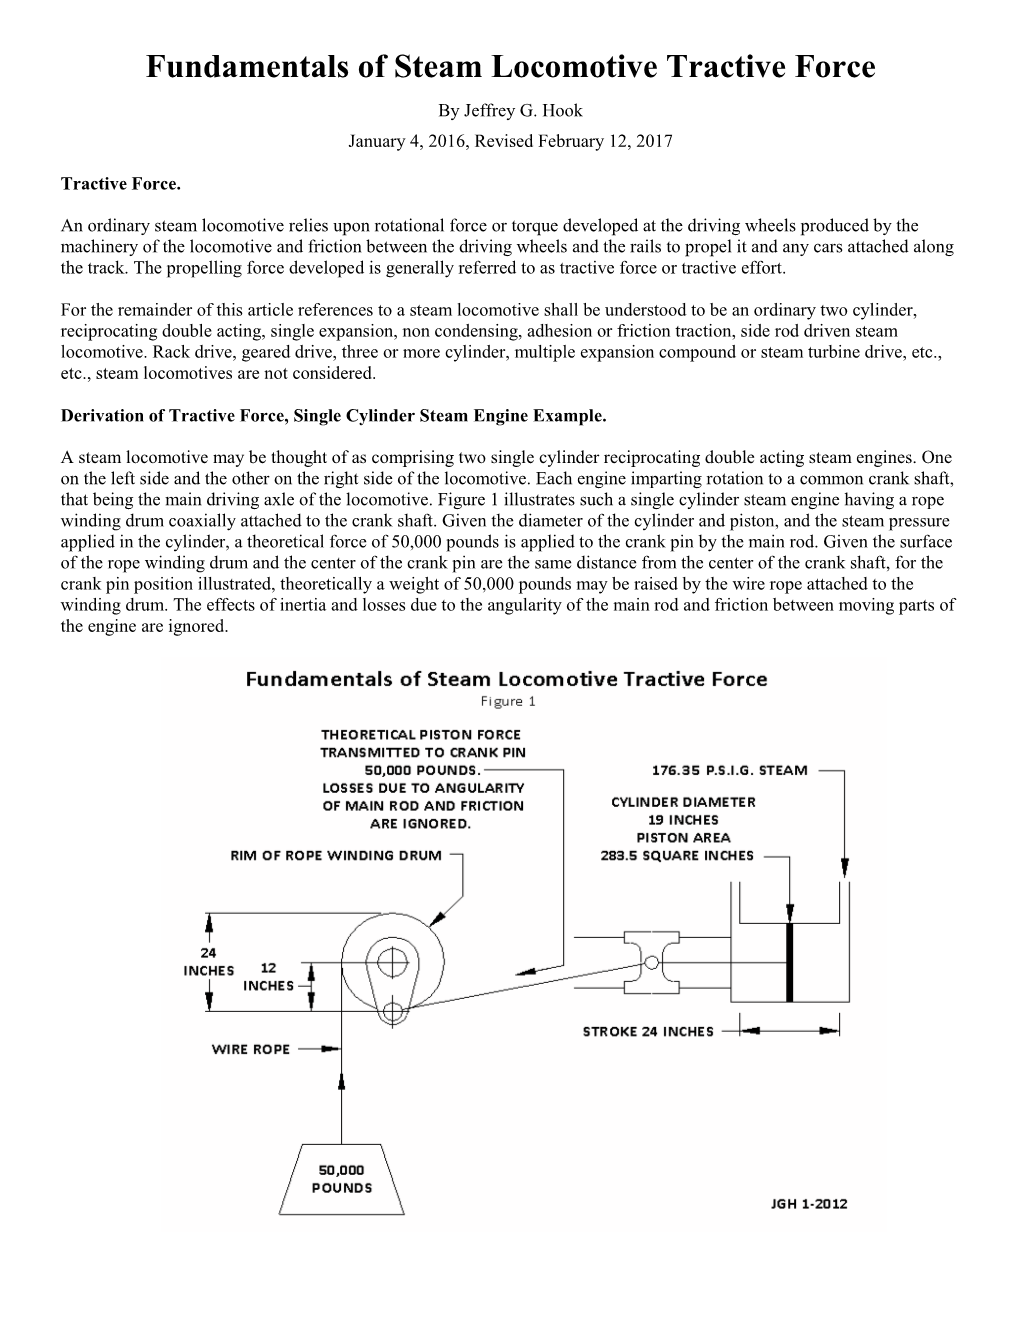 Fundamentals of Steam Locomotive Tractive Force